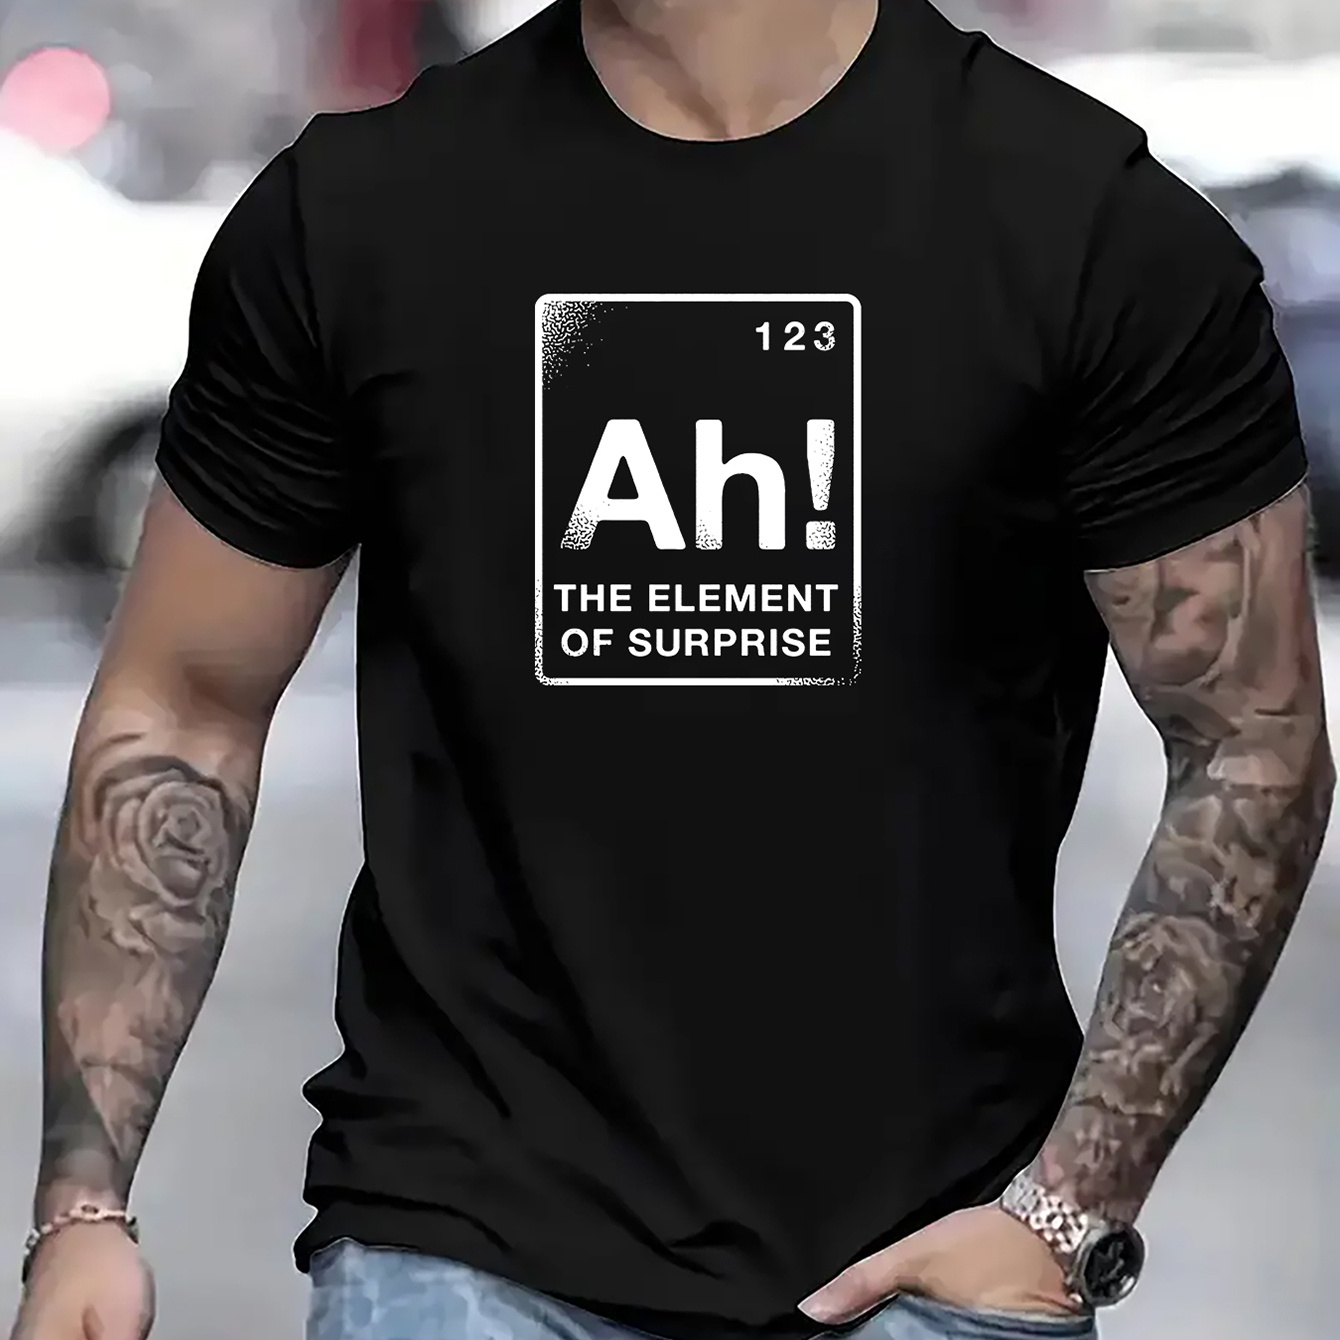 

Ah! Letters Print Casual Crew Neck Short Sleeves For Men, Quick-drying Comfy Casual Summer T-shirt For Daily Wear Work Out And Vacation Resorts